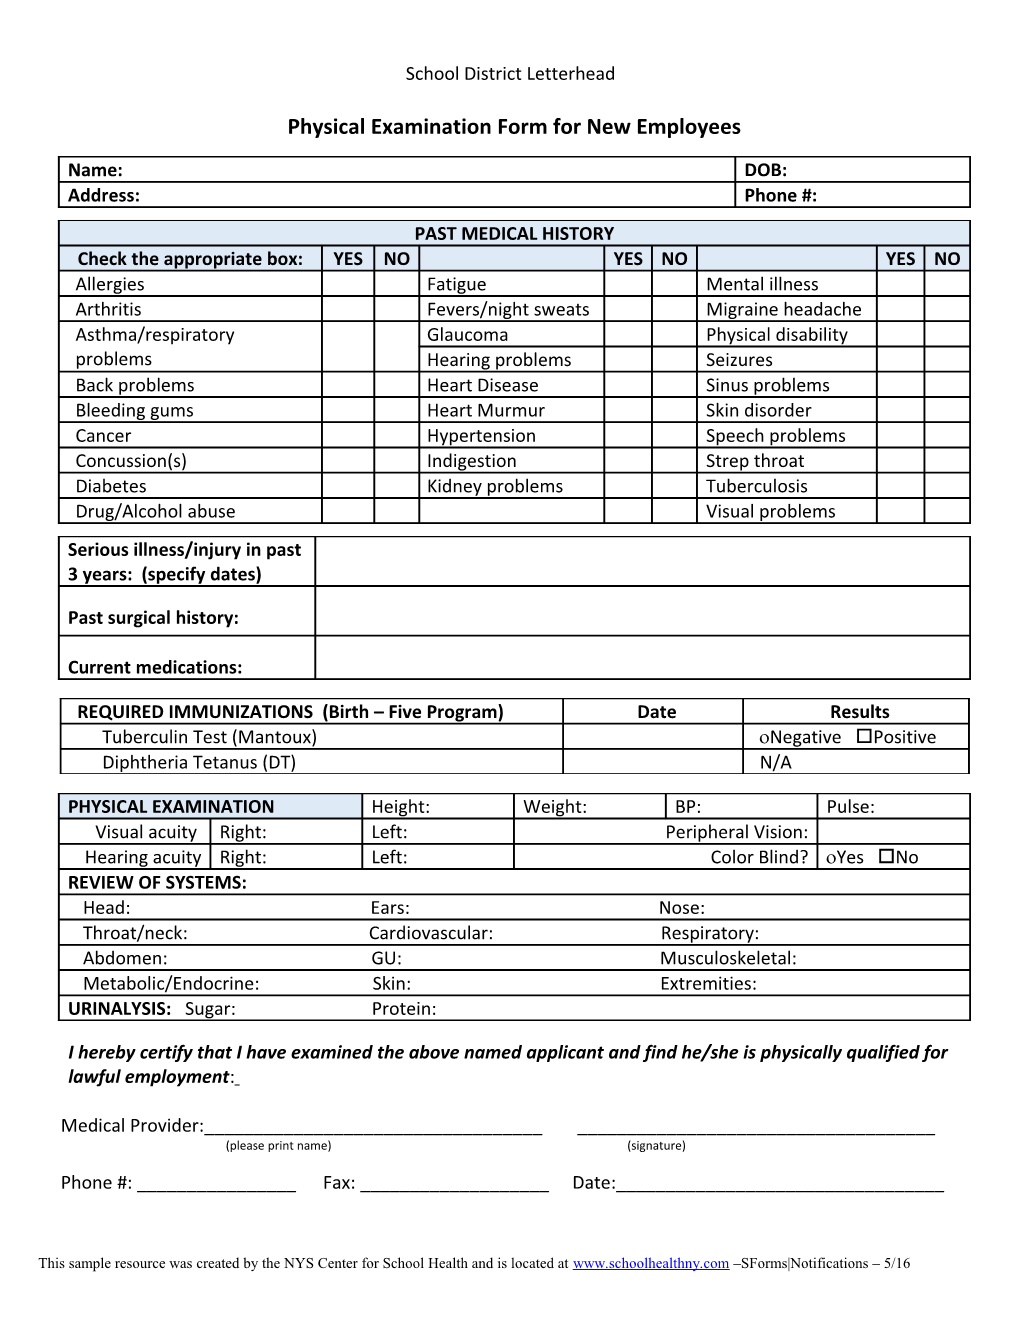 Physical Examination Report